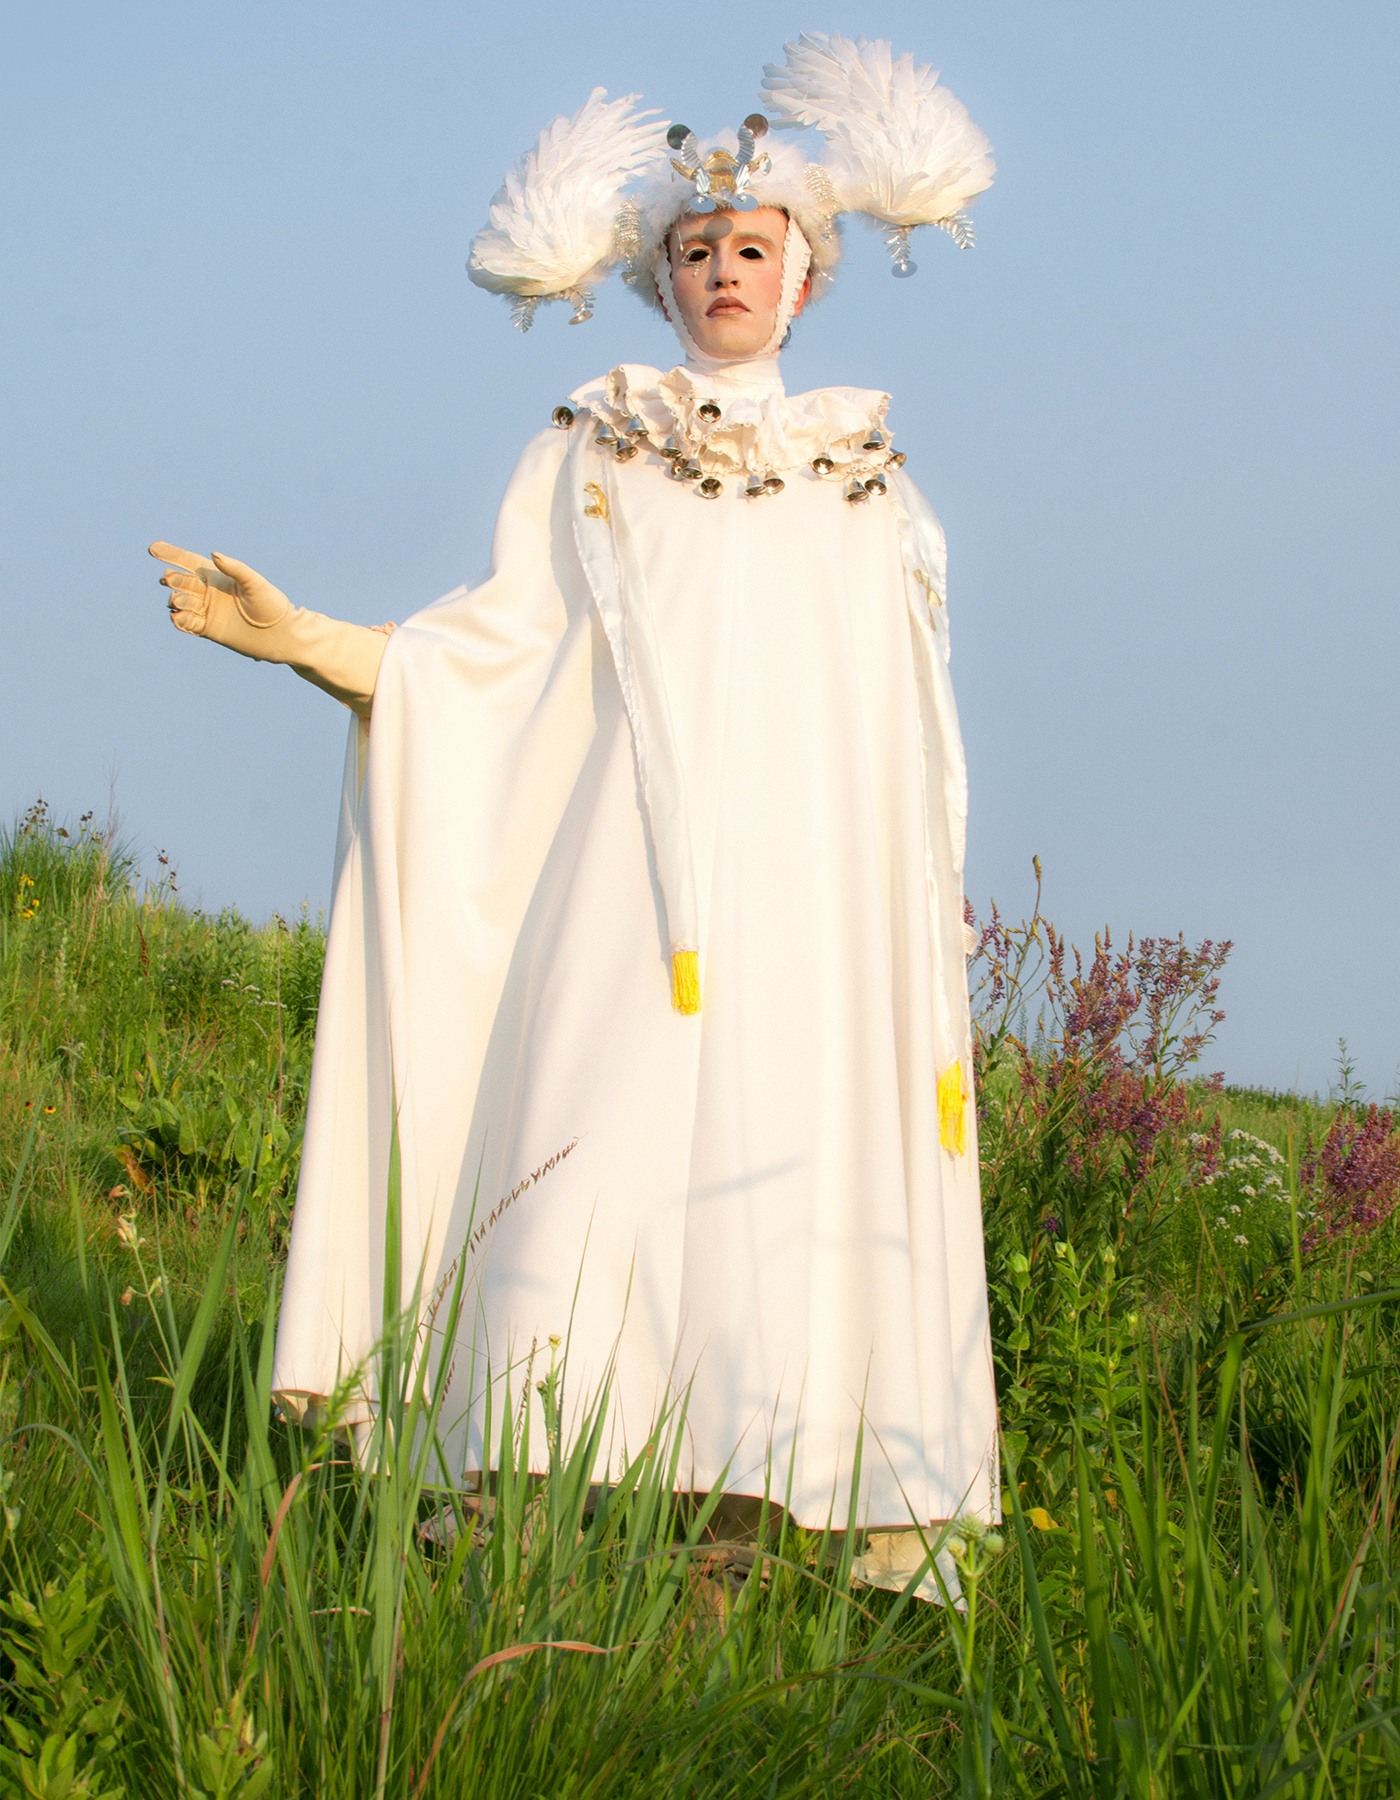 A figure in a white cloak with angel wing headpiece standing in a field